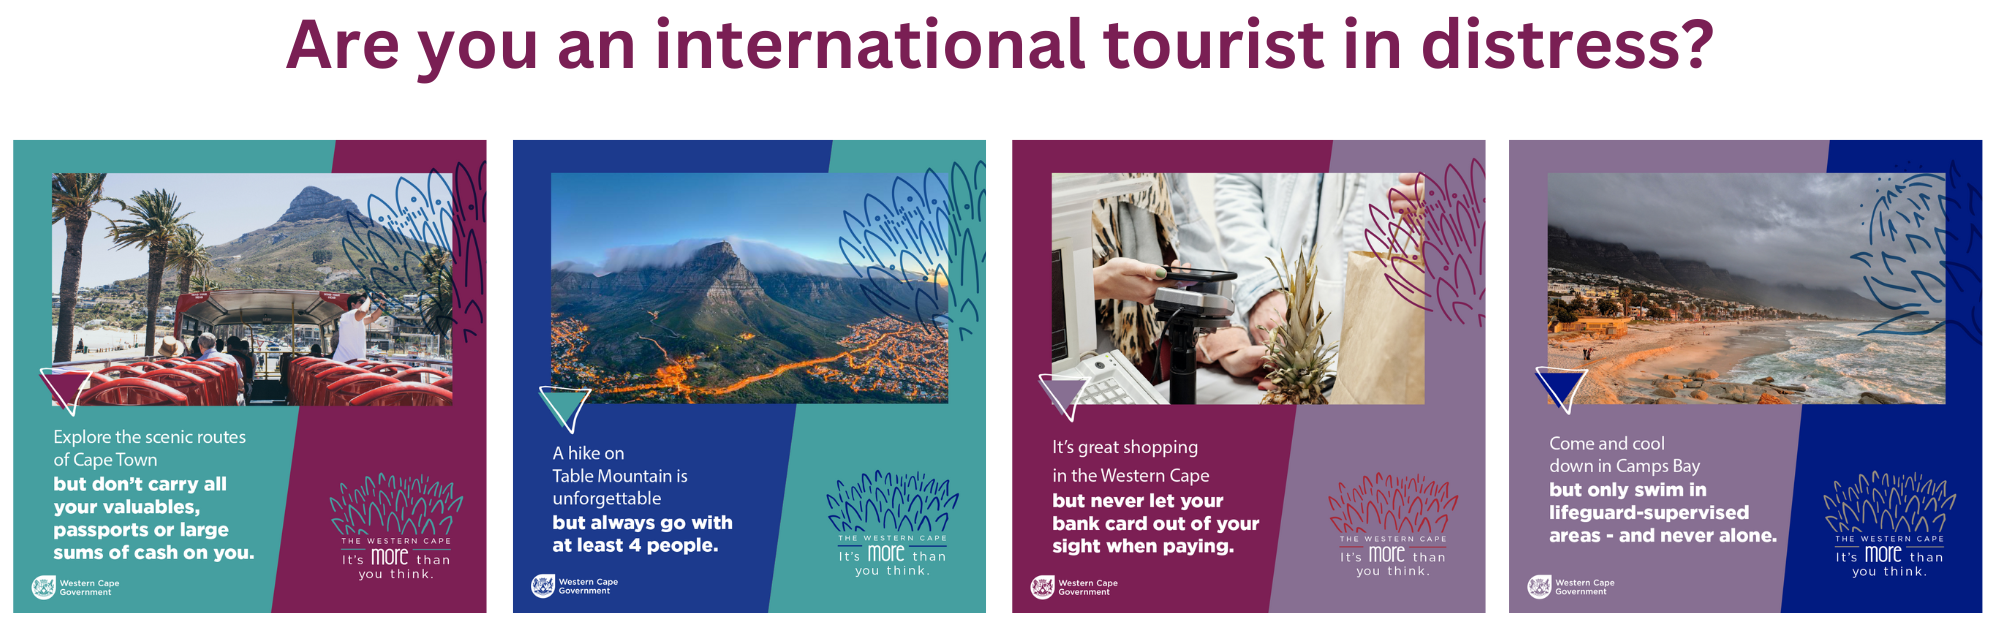 tourism_safety_banner_2_png.png